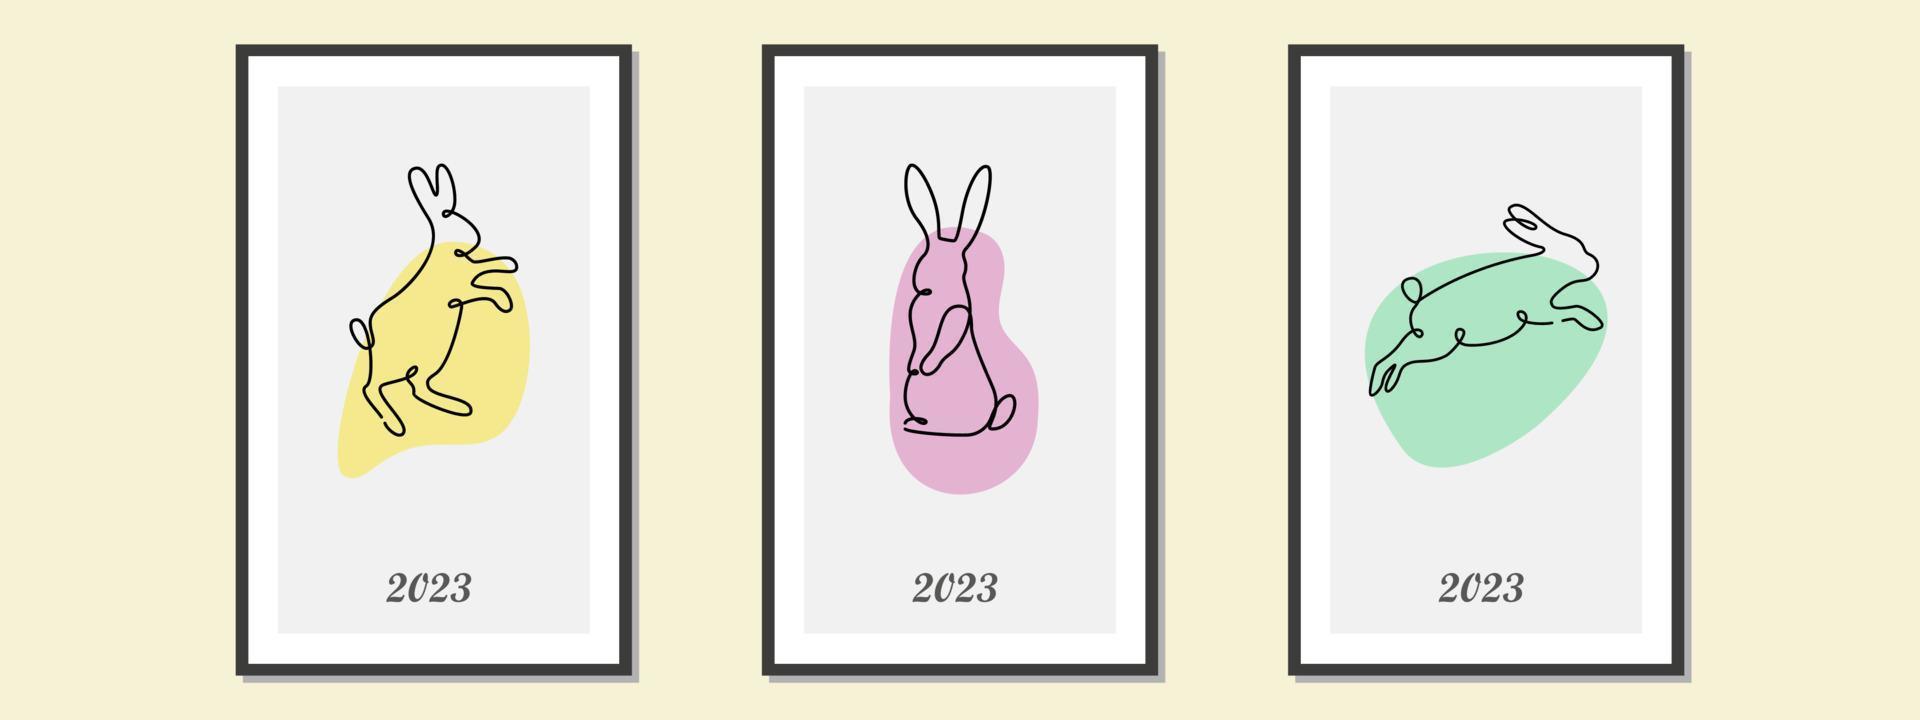 Set of different black rabbits silhouettes, isolated on a colorful background for design use. Silhouettes of New Years bunnies in simple one line style. 2023 year of the rabbit. Christmas vector. vector